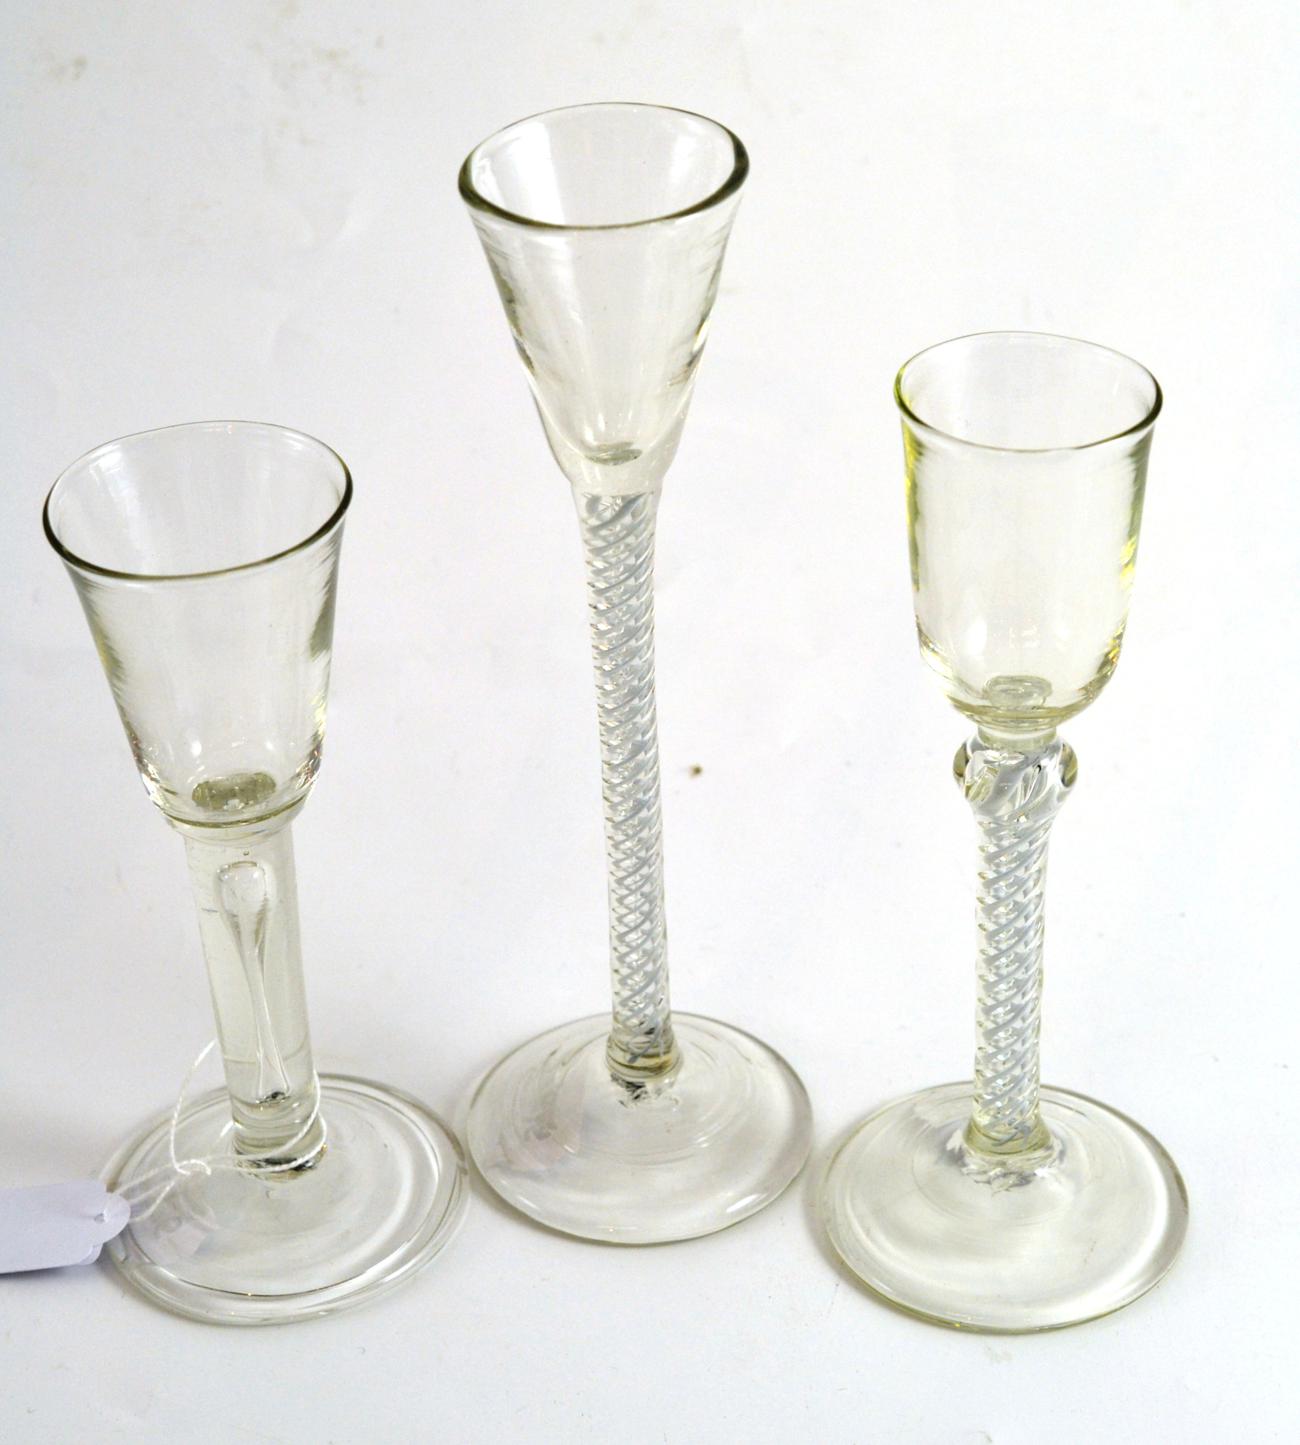 Two spiral twist wine glasses and an 18th century style wine glass (3)